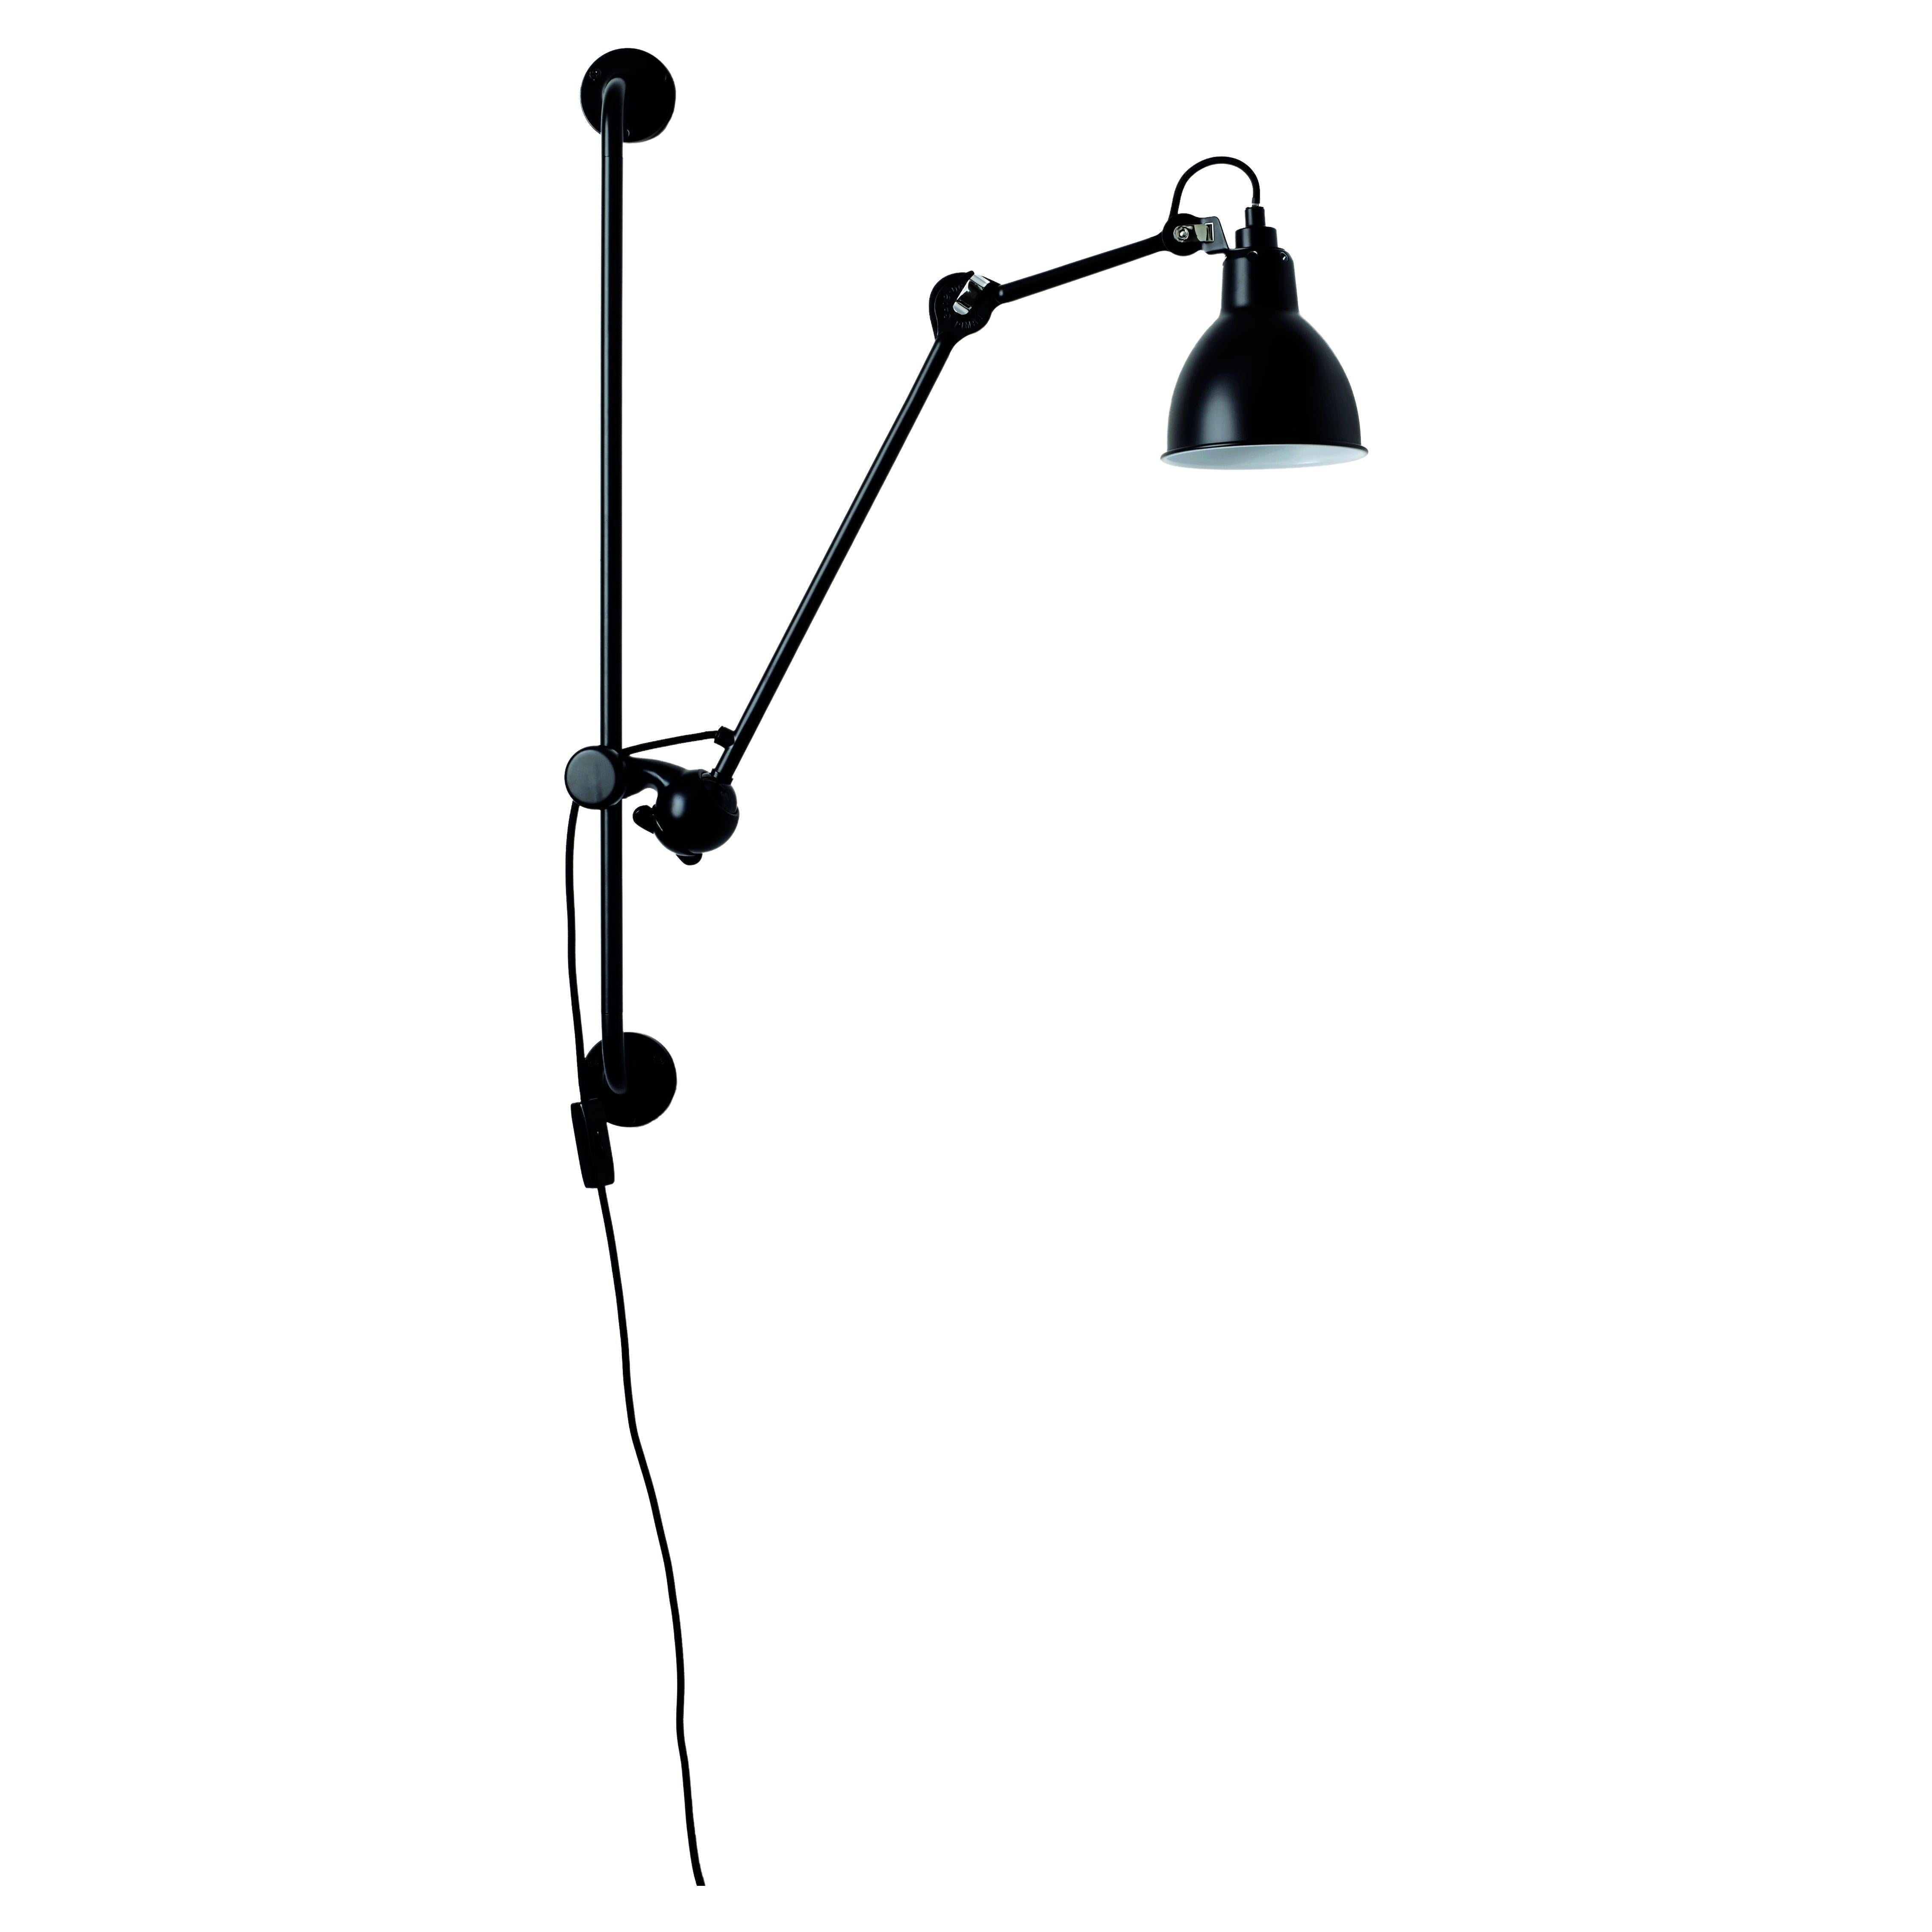 DCW Editions La Lampe Gras N°210 Wall Lamp in Black Arm and Black Shade